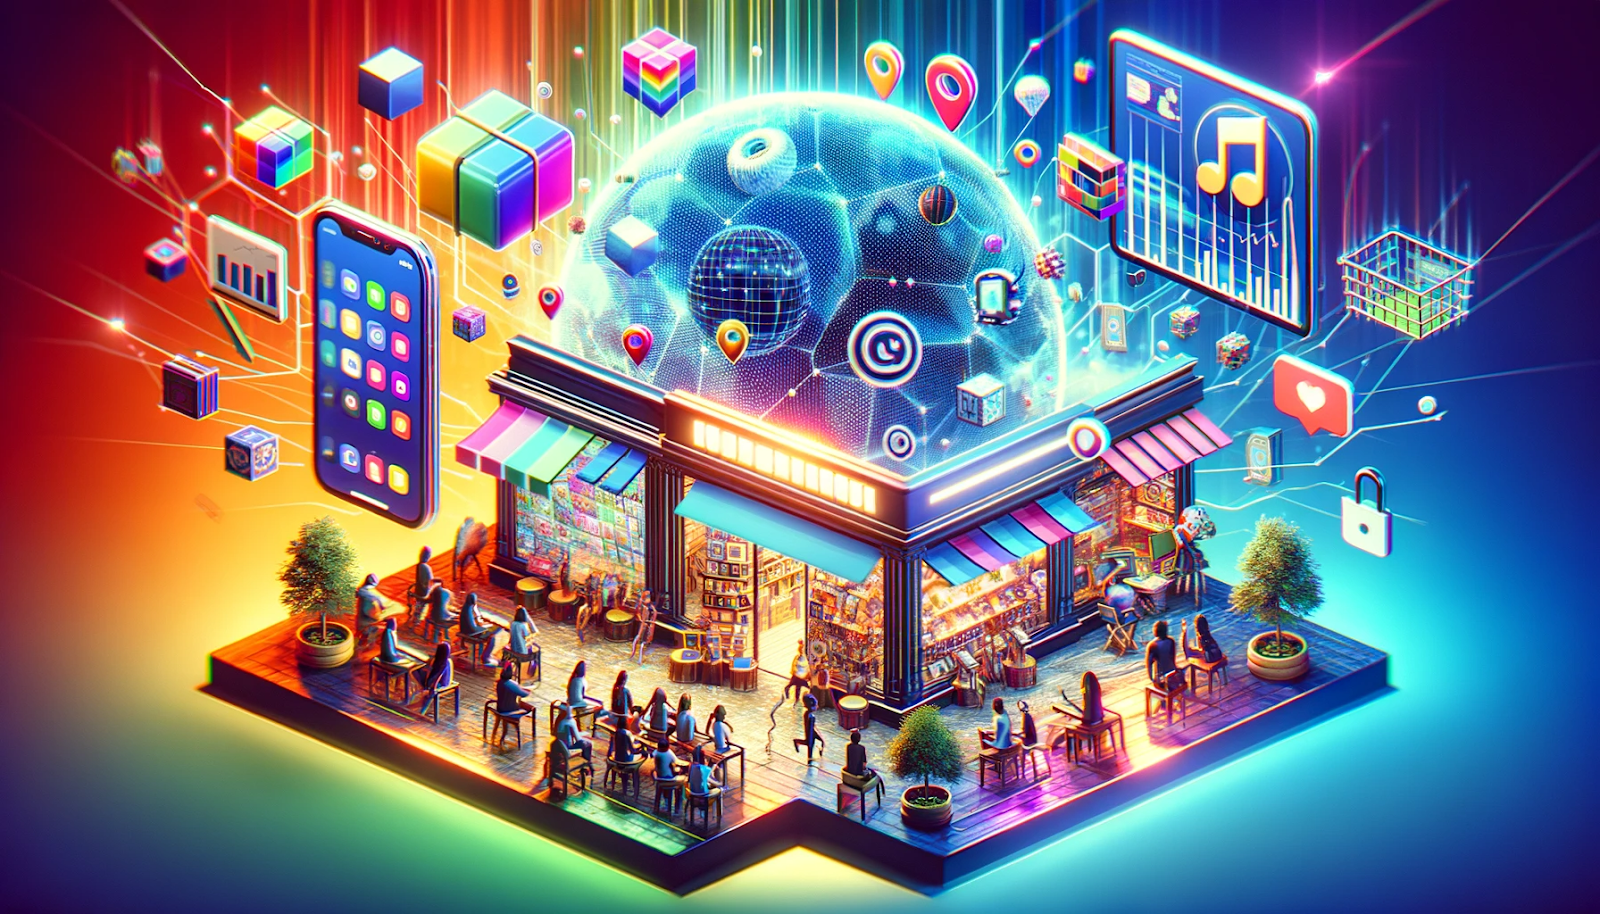 Conceptual image of a lively digital marketplace displaying a range of NFT products, highlighting the diversity and vibrancy of the NFT industry in an engaging virtual storefront.